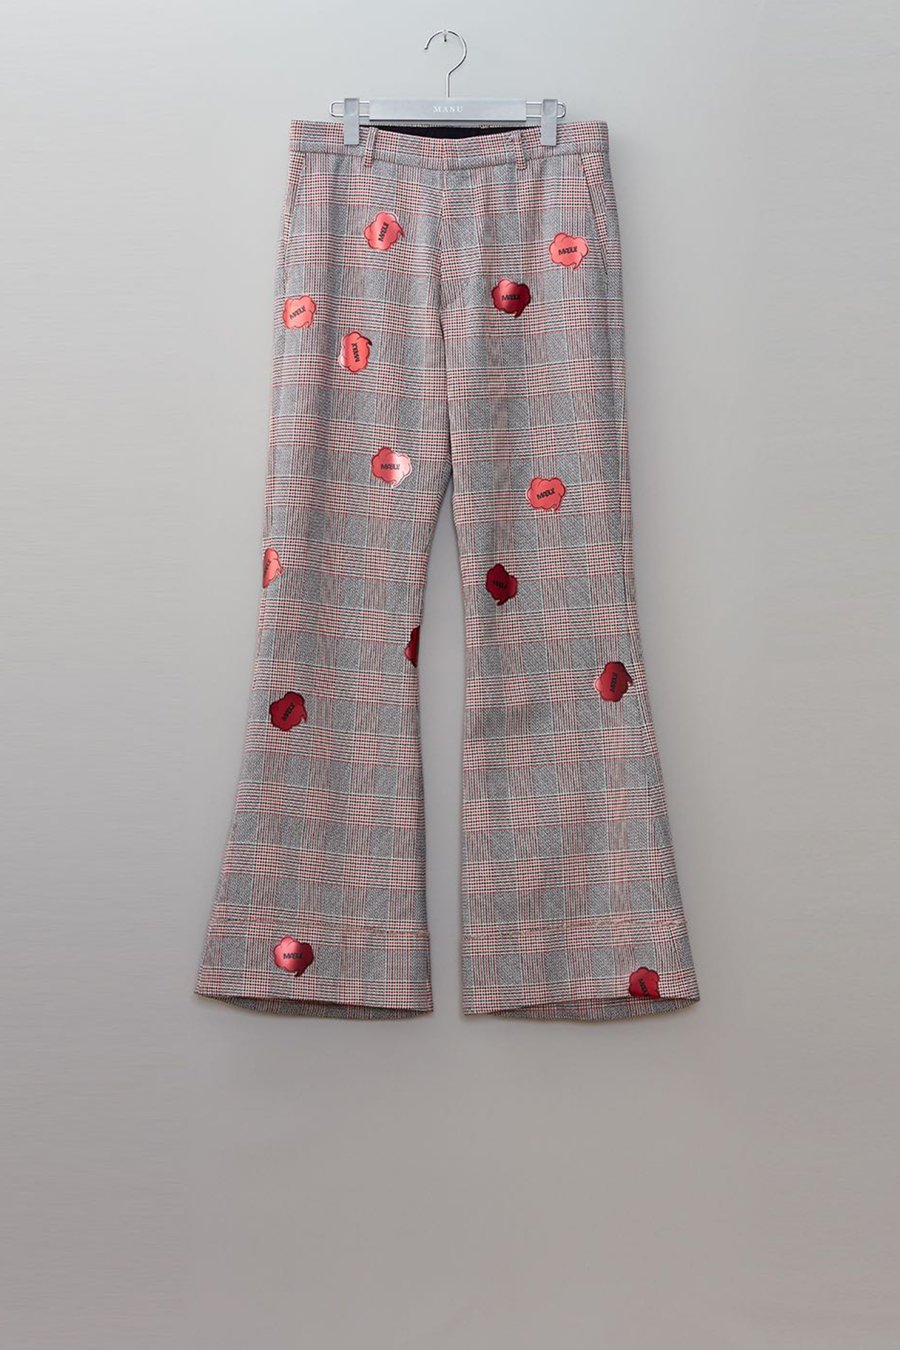 MASU  GLEN PLAID FLARE TROUSERS(RED)<img class='new_mark_img2' src='https://img.shop-pro.jp/img/new/icons15.gif' style='border:none;display:inline;margin:0px;padding:0px;width:auto;' />